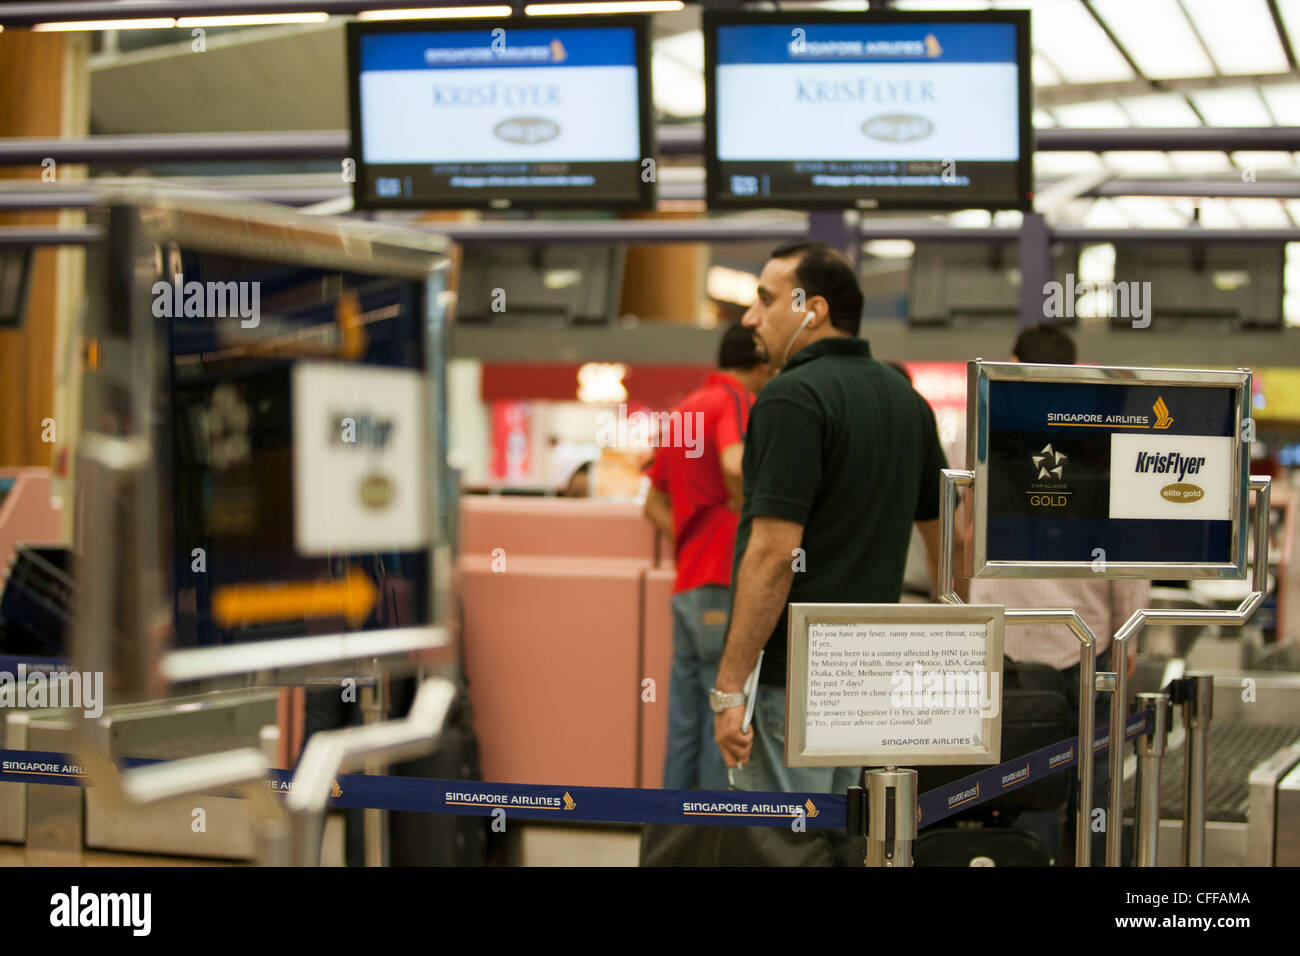 Passengers check-in for their Singapore Airlines Ltd. flight at Changi Airport in Singapore Stock Photo